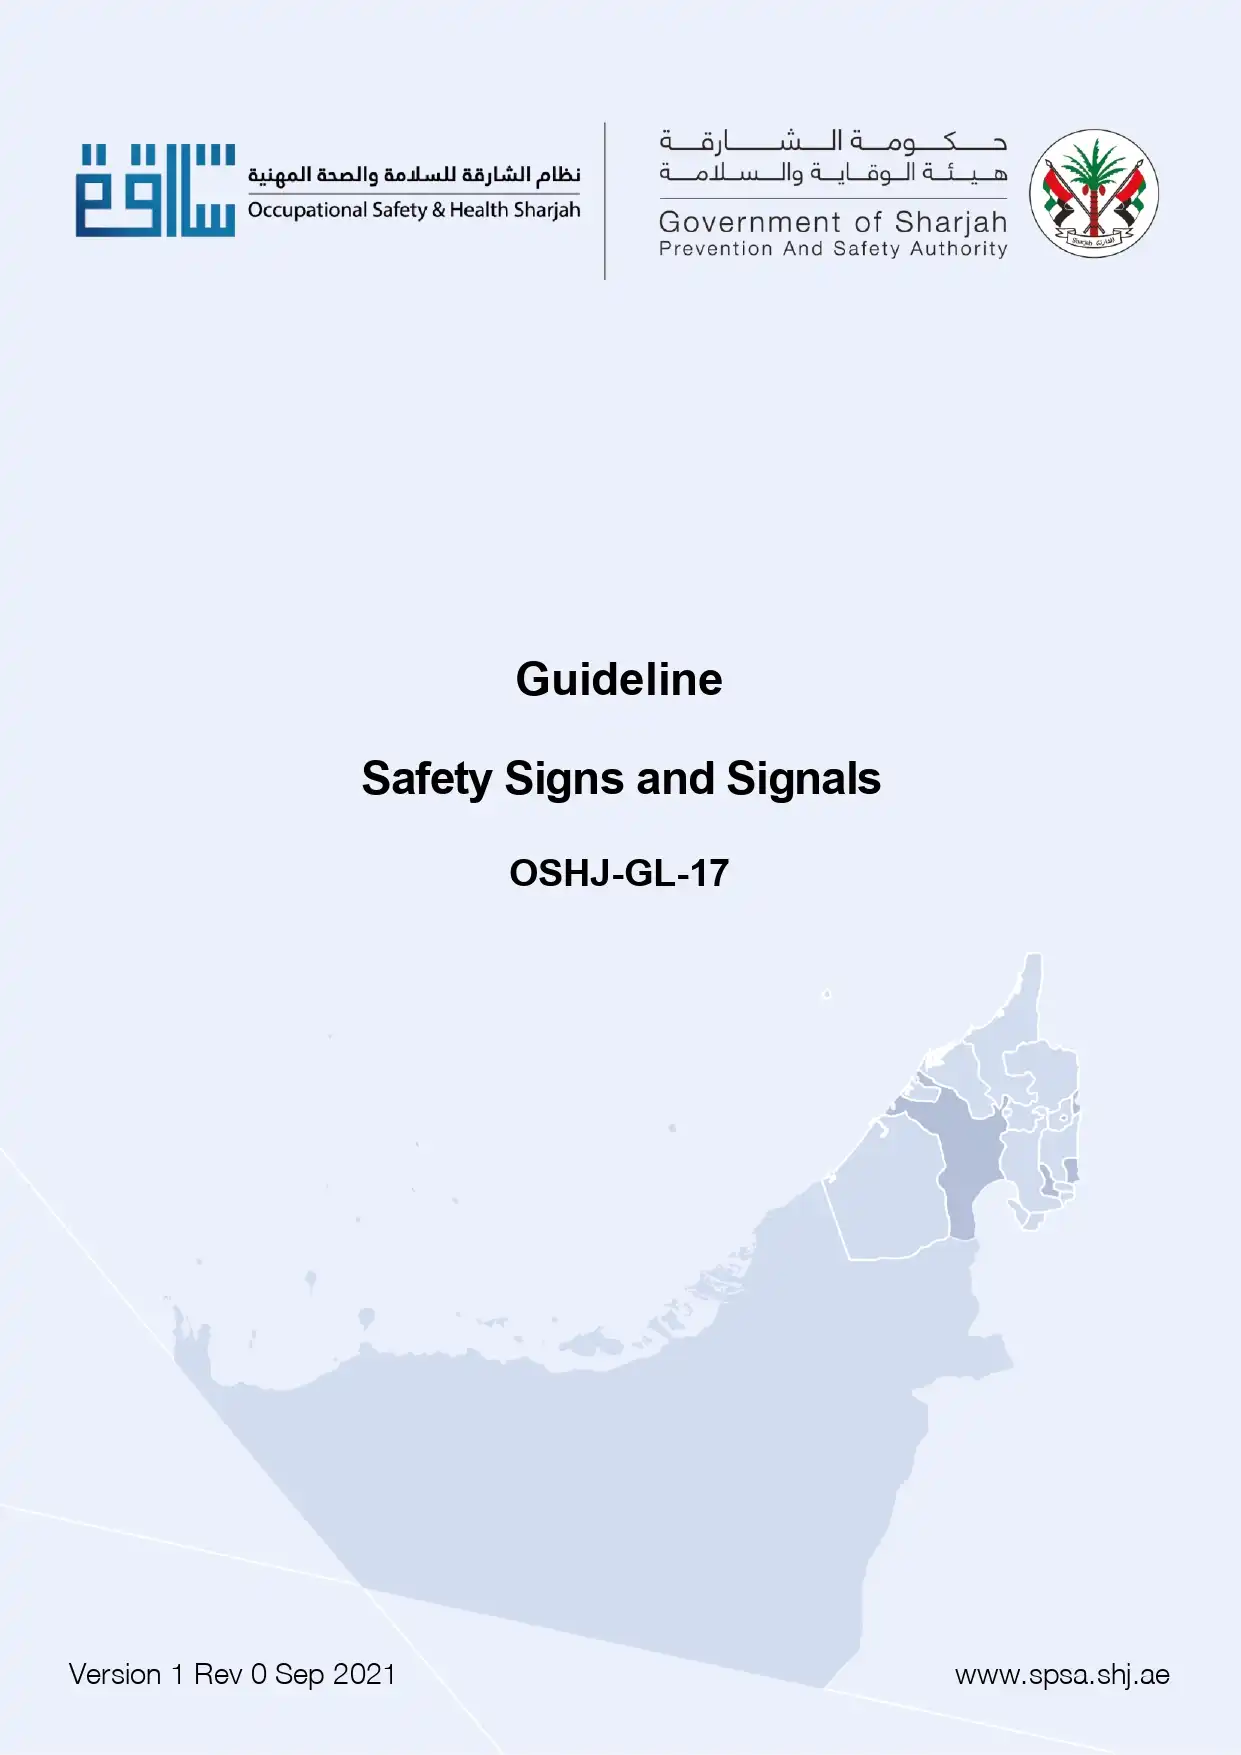 Guideline Safety Signs and Signals